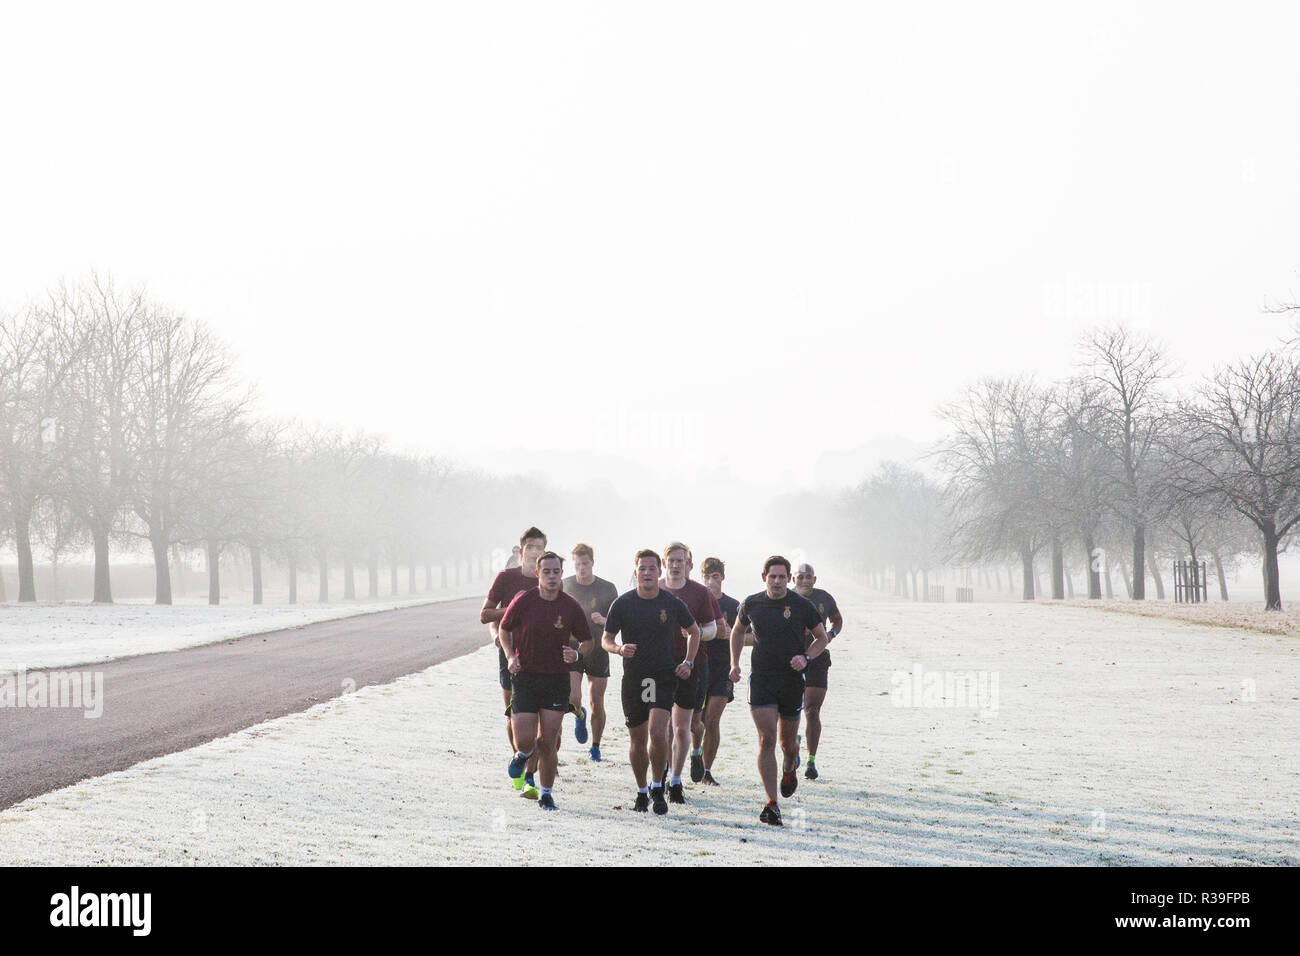 Windsor, UK. 22nd November, 2018. Soldiers train in heavy frost and foggy conditions alongside the Long Walk in Windsor Great Park. After the coldest night since February, there was widespread frost and freezing fog in Berkshire this morning but temperatures are expected to rise for a few days from tomorrow to more normal temperatures for November. Credit: Mark Kerrison/Alamy Live News Stock Photo